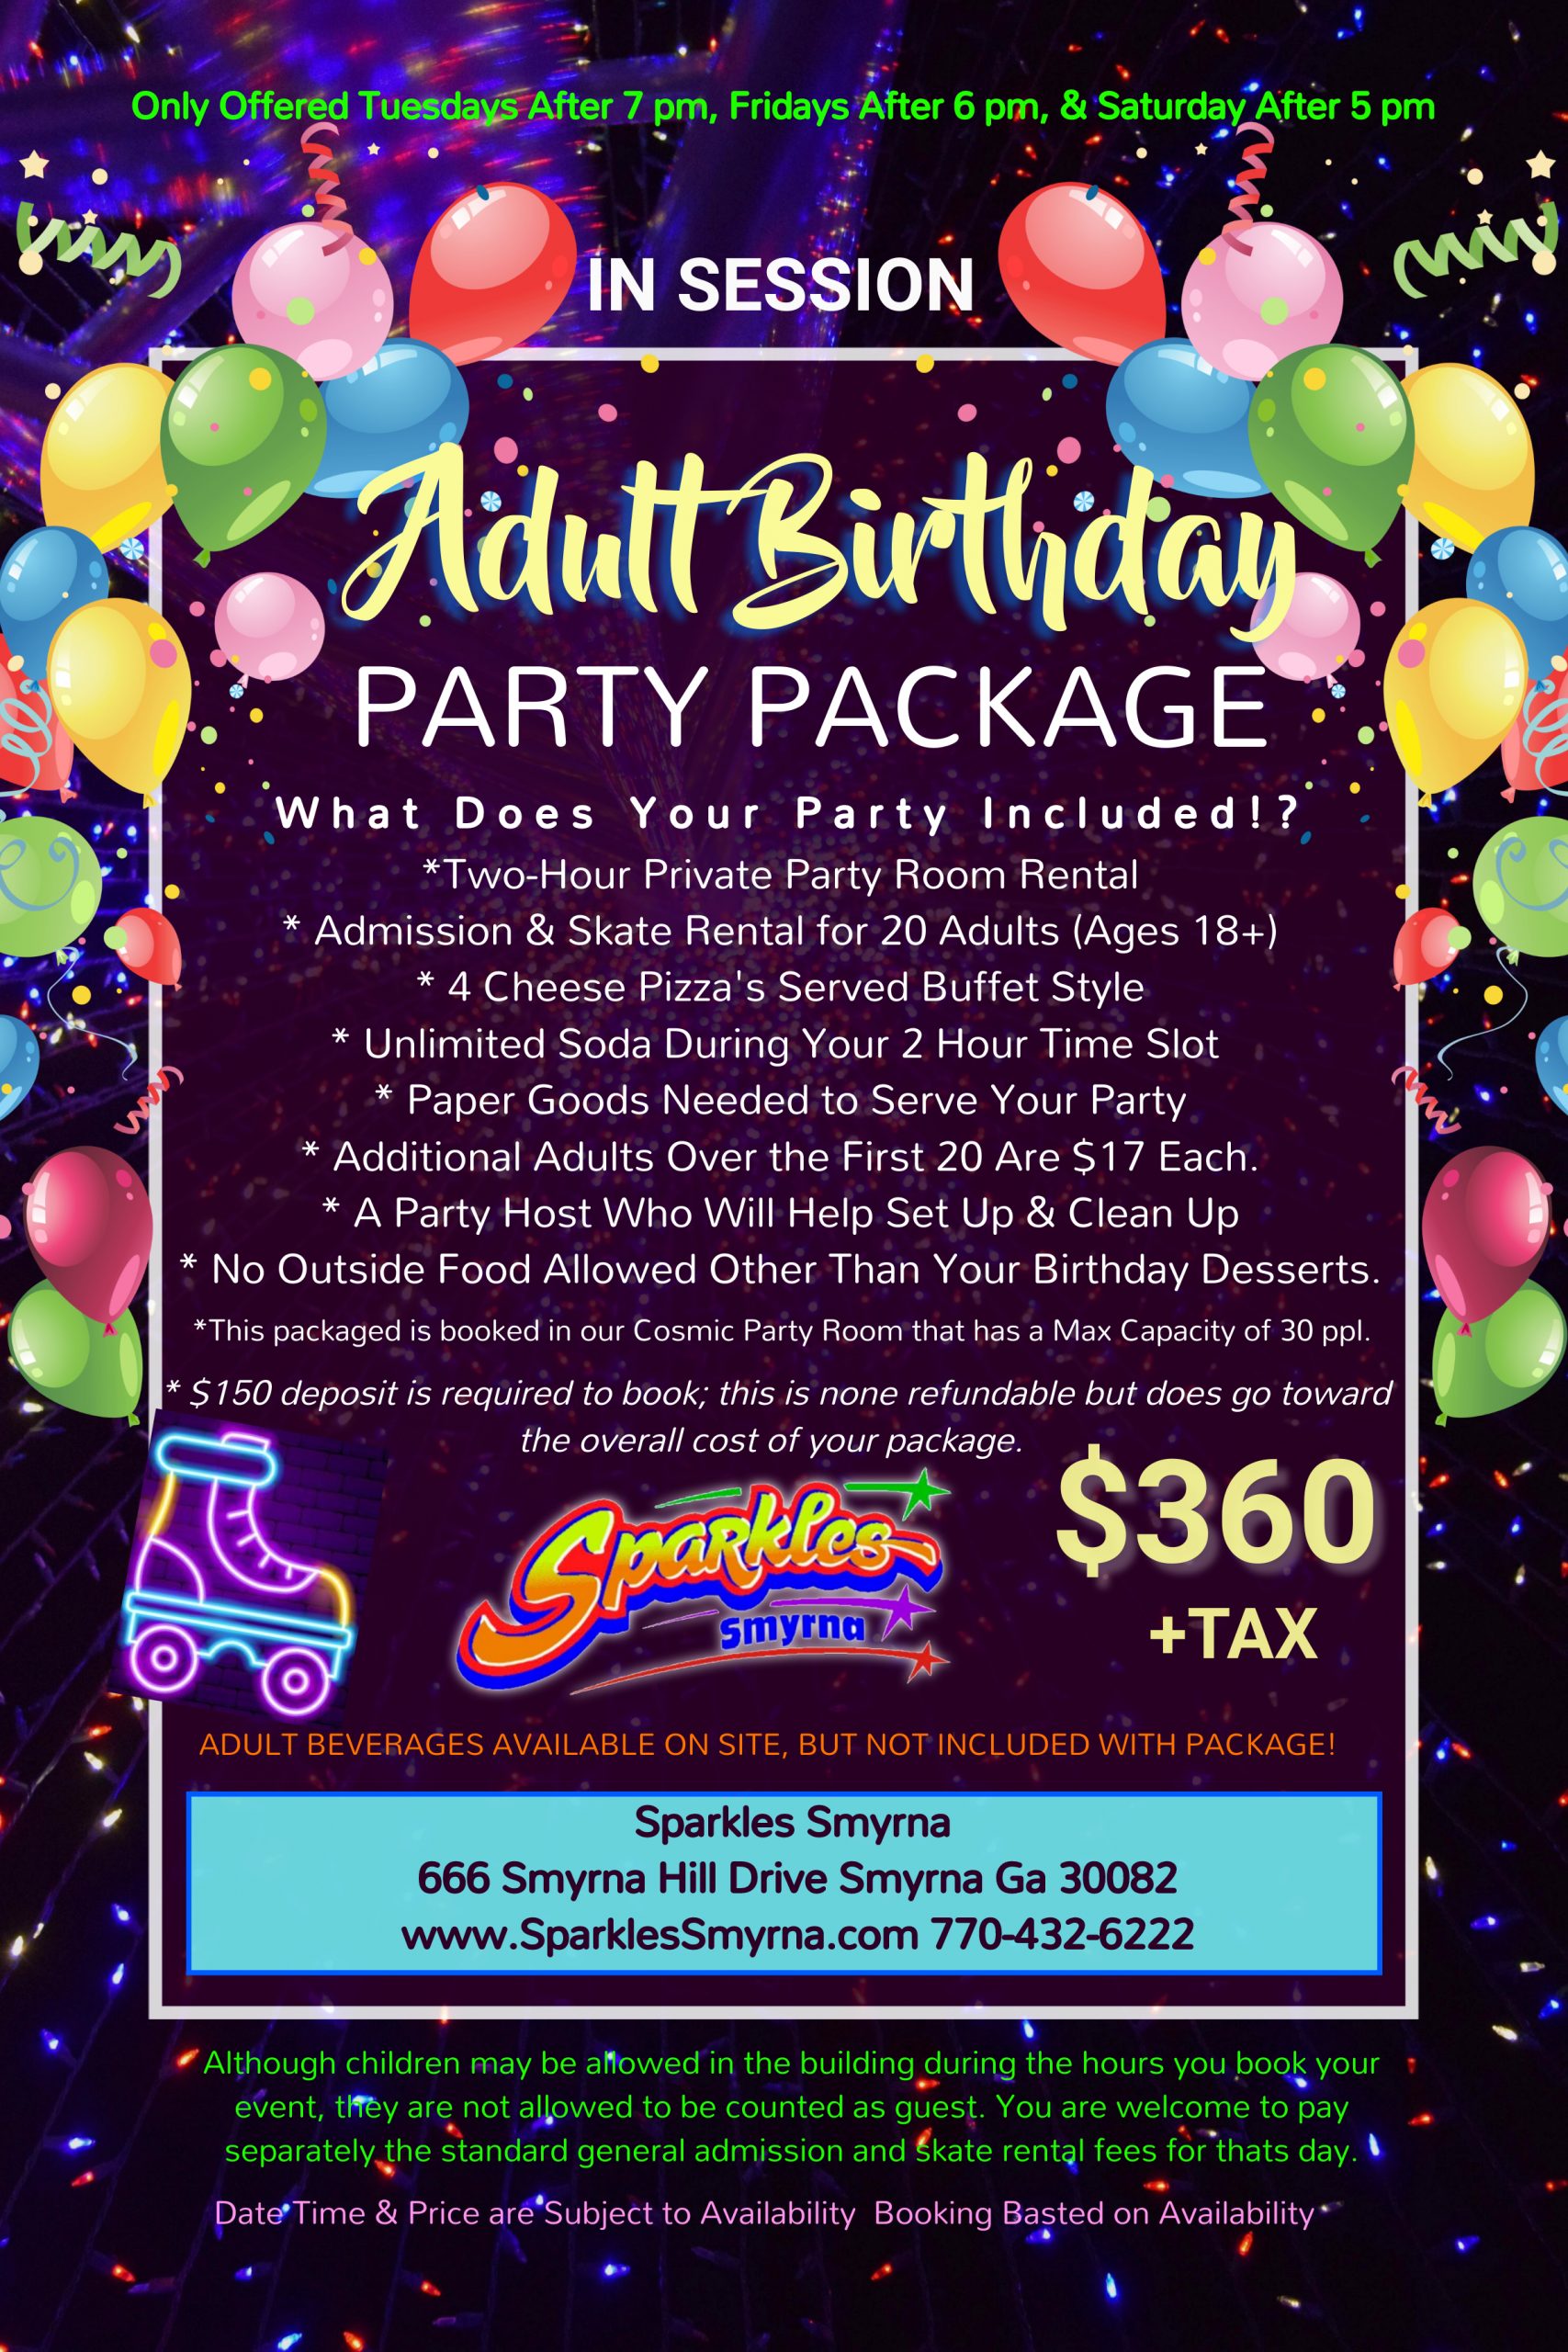 Adult Birthday Party Package